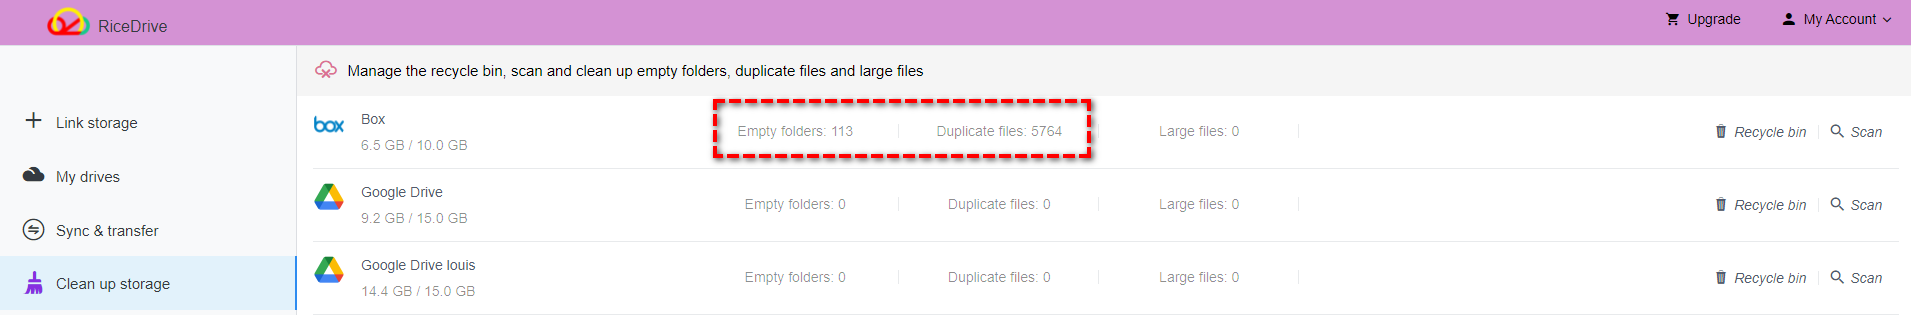 Duplicate files found by ricedrive